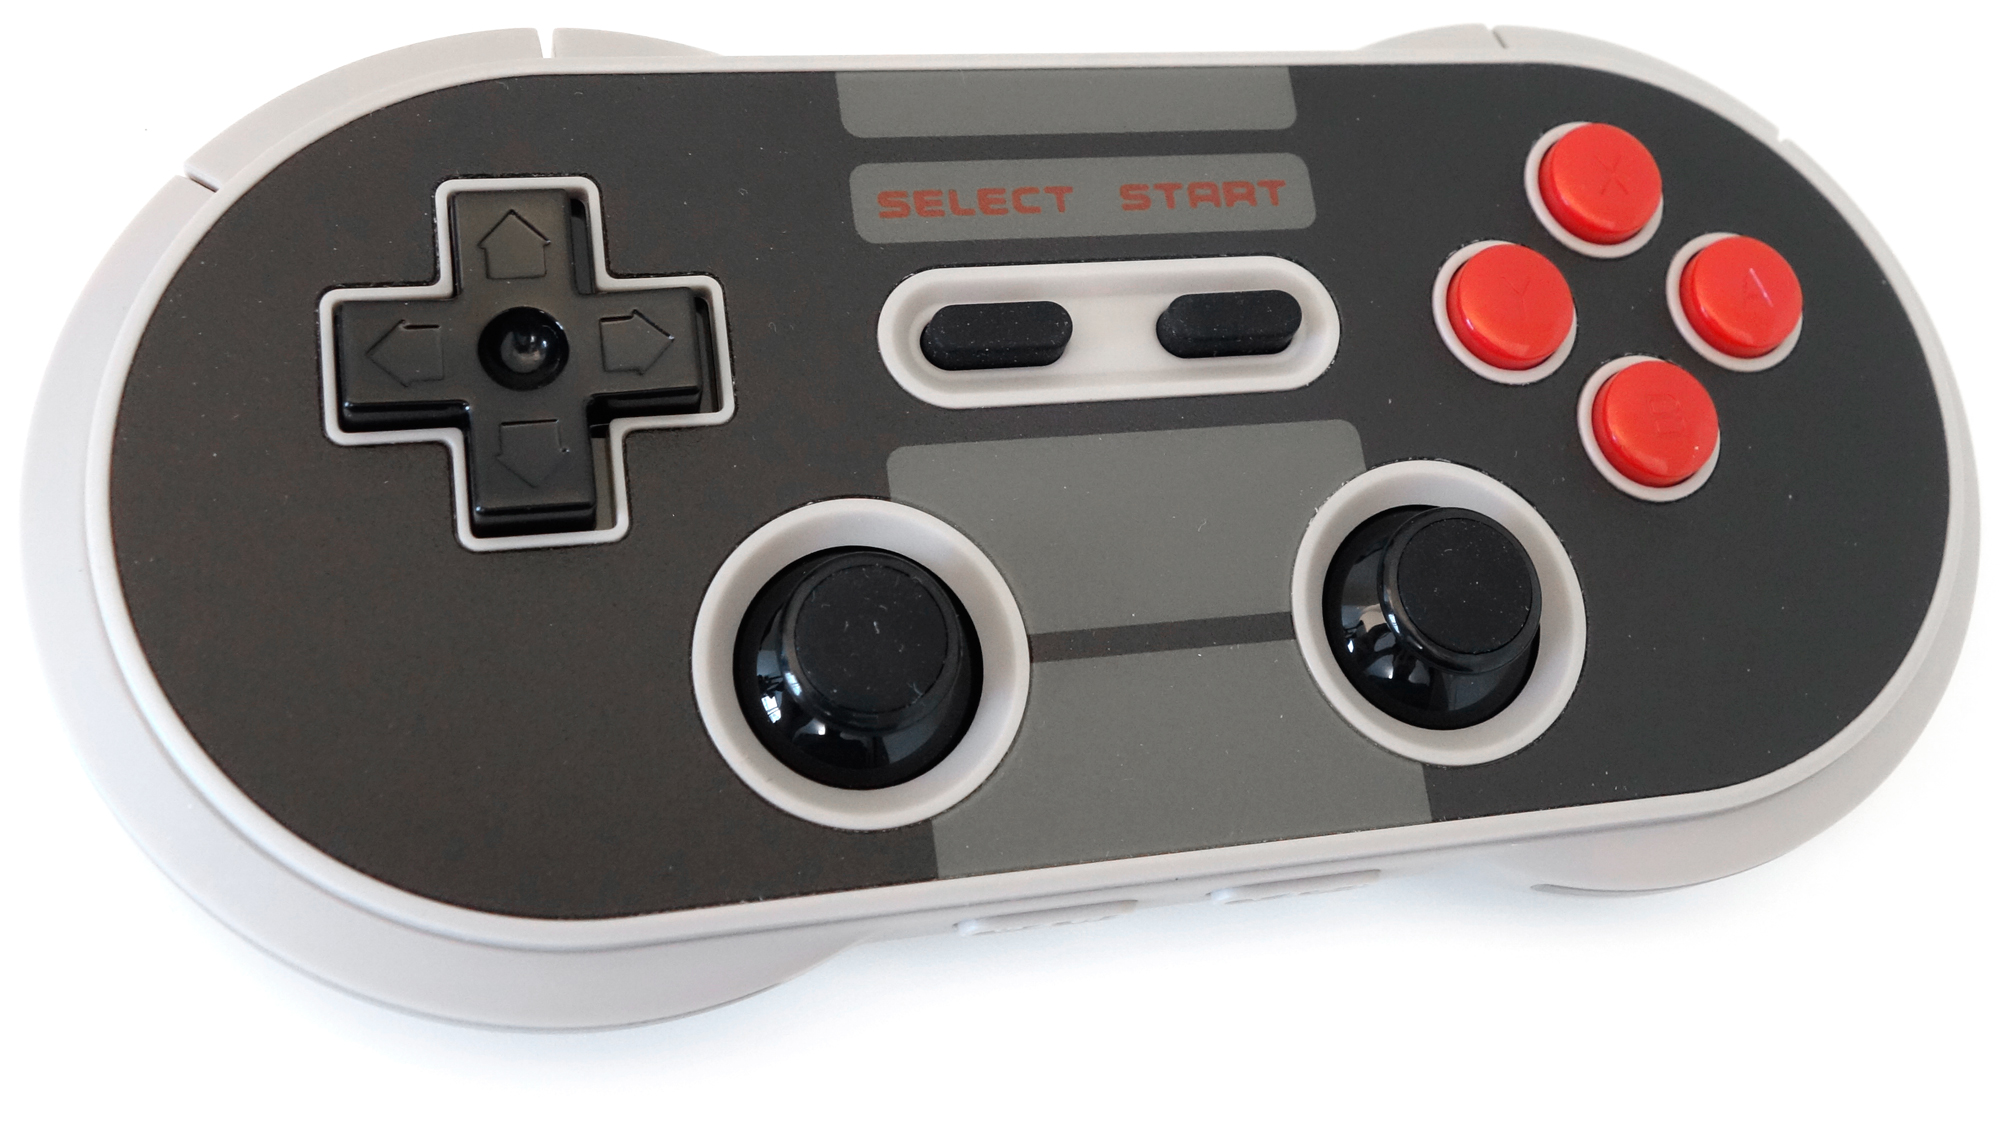 The NES30 Pro Is The Perfect Portable Controller For The Nintendo Switch